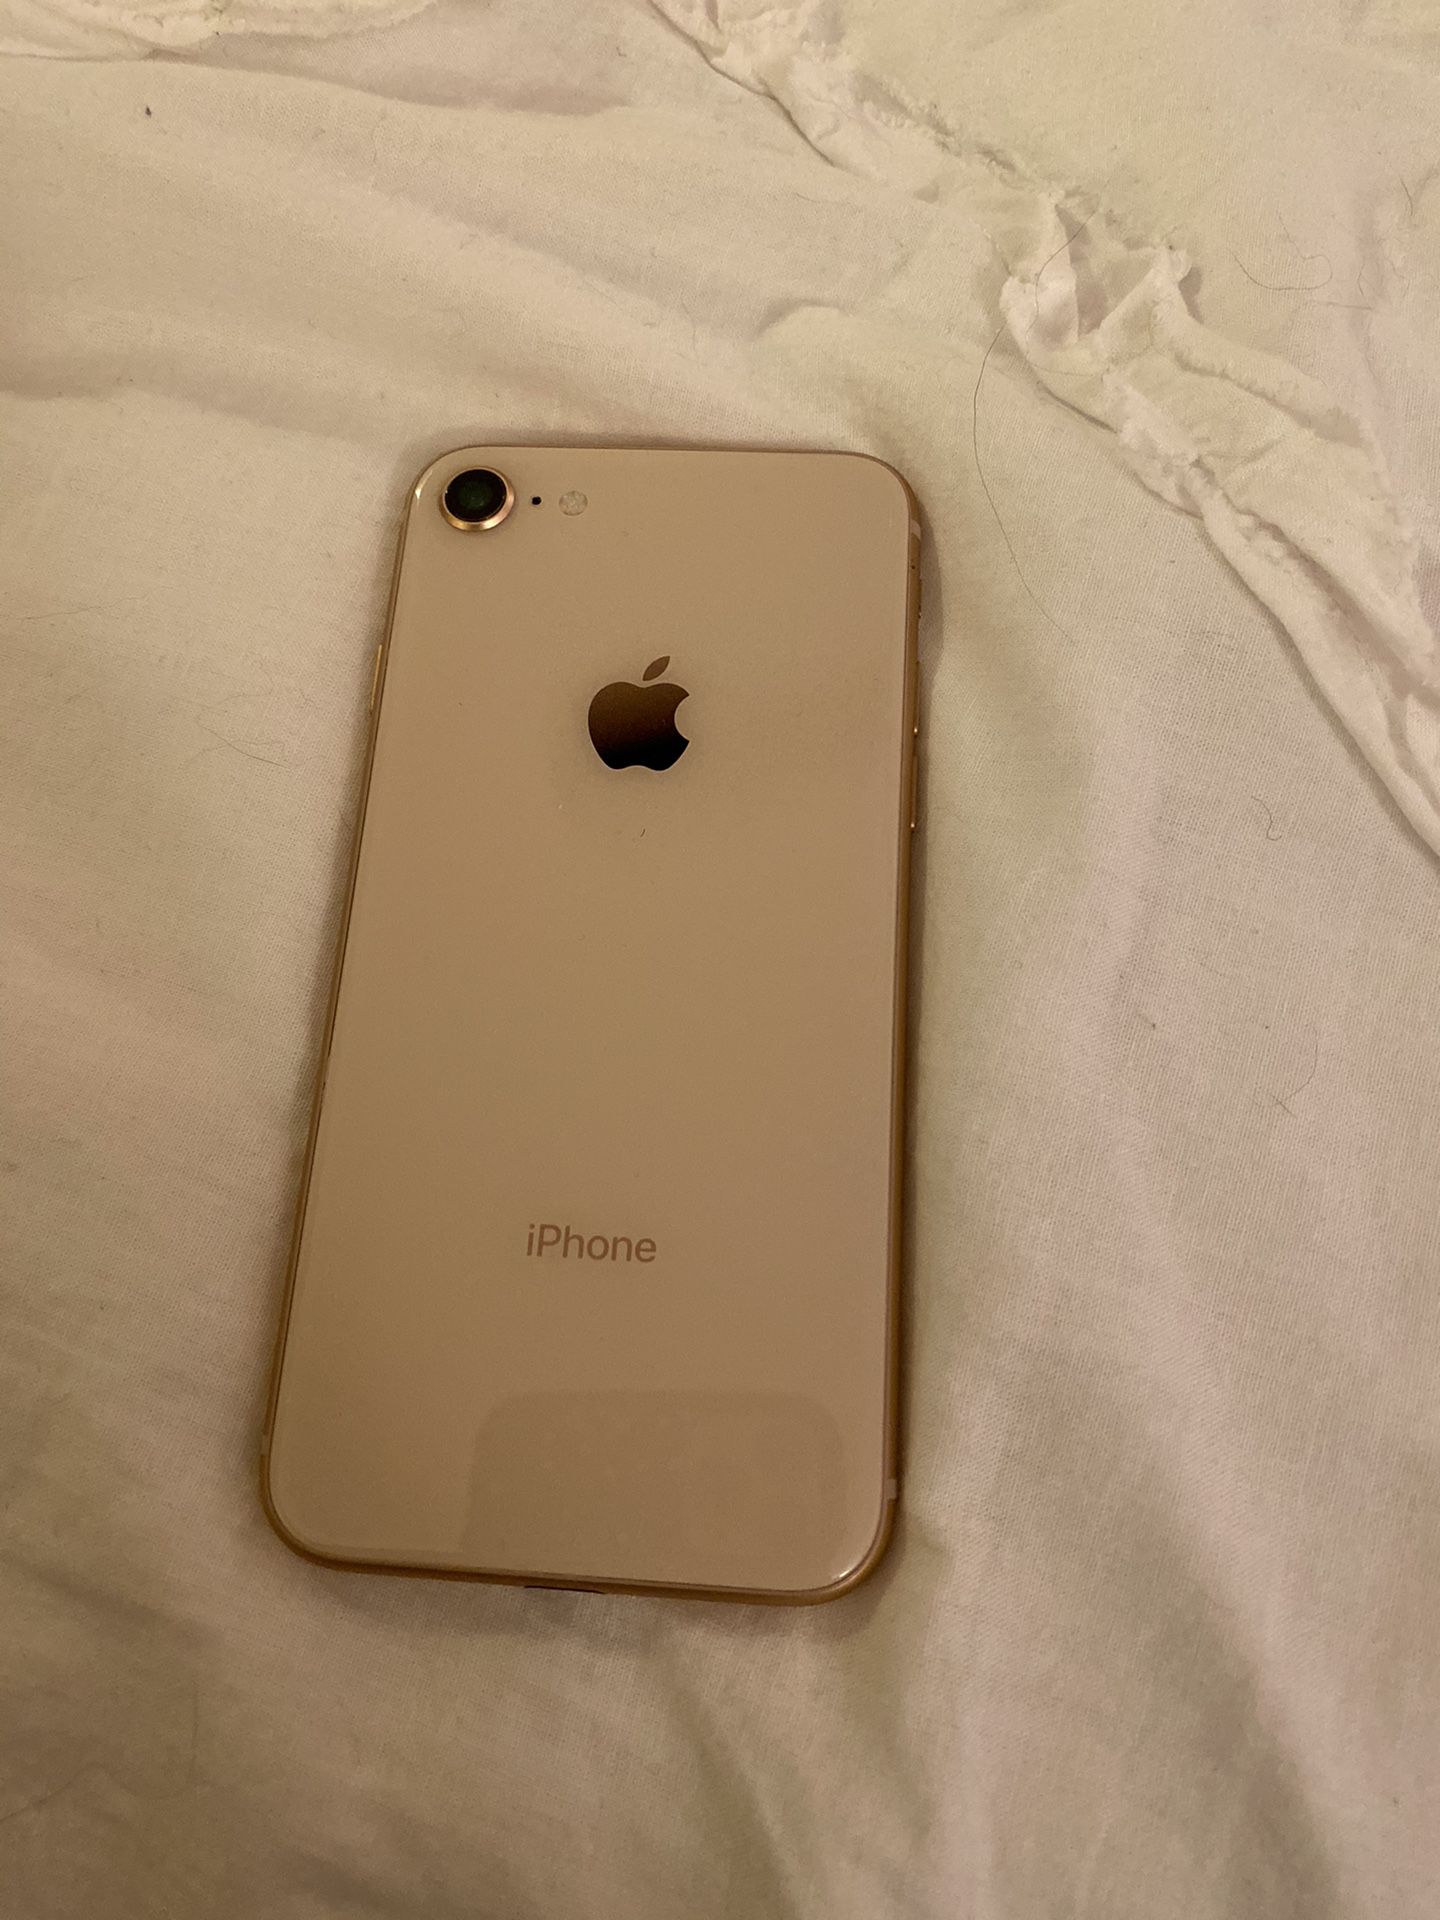 iPhone 8 64GB rose gold. Firm on price. Unlocked one owner.